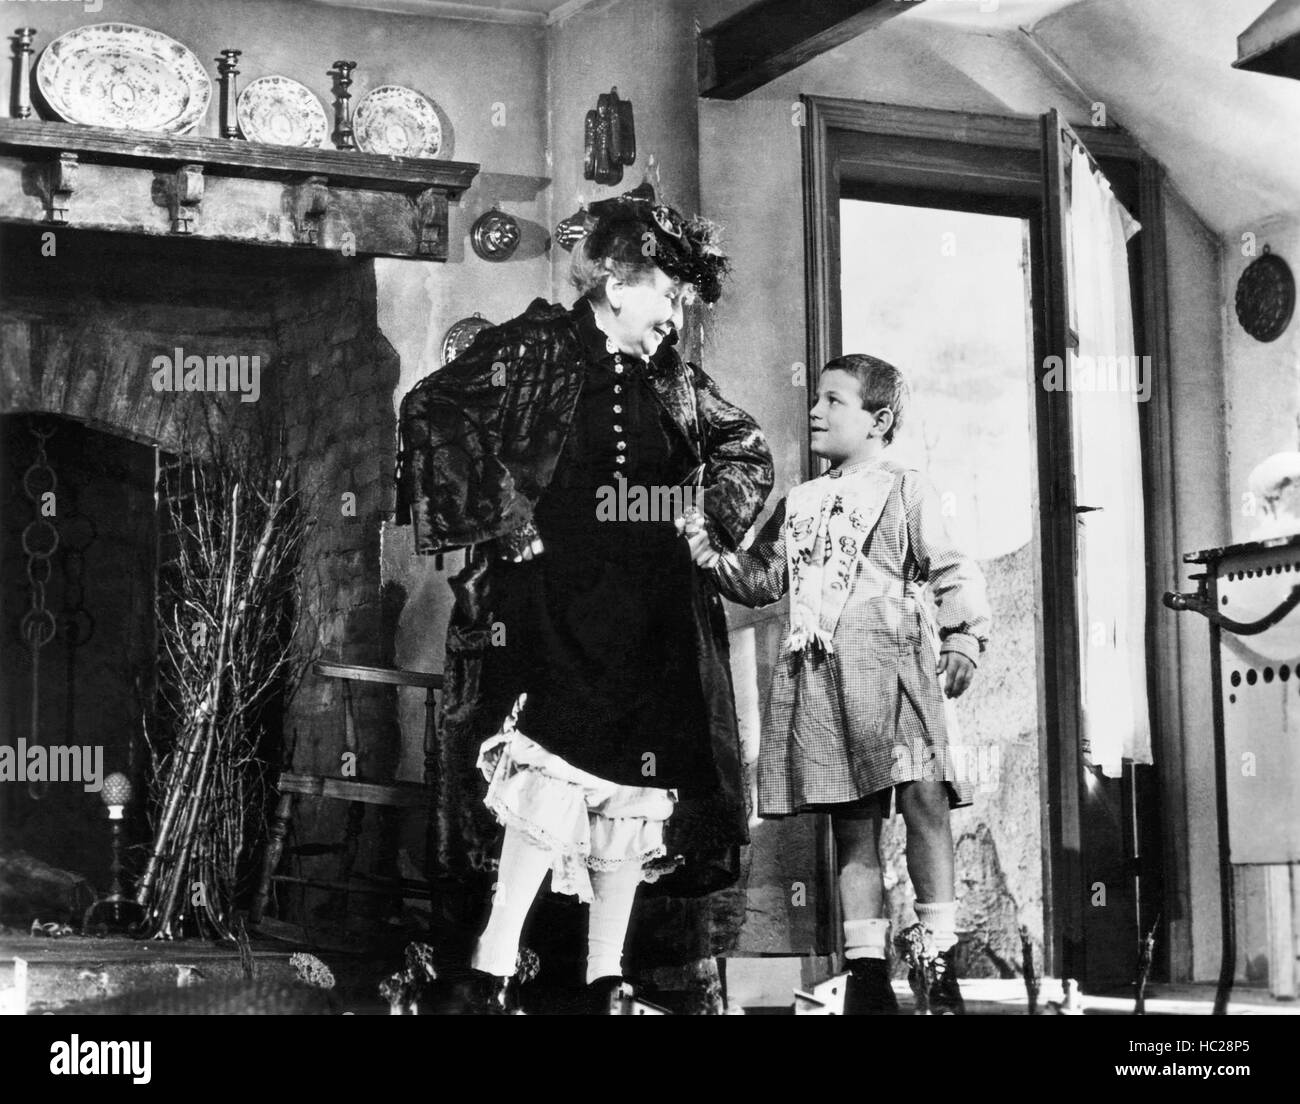 MIRACLE IN MILAN, Emma Gramatica, 1951 Stock Photo - Alamy